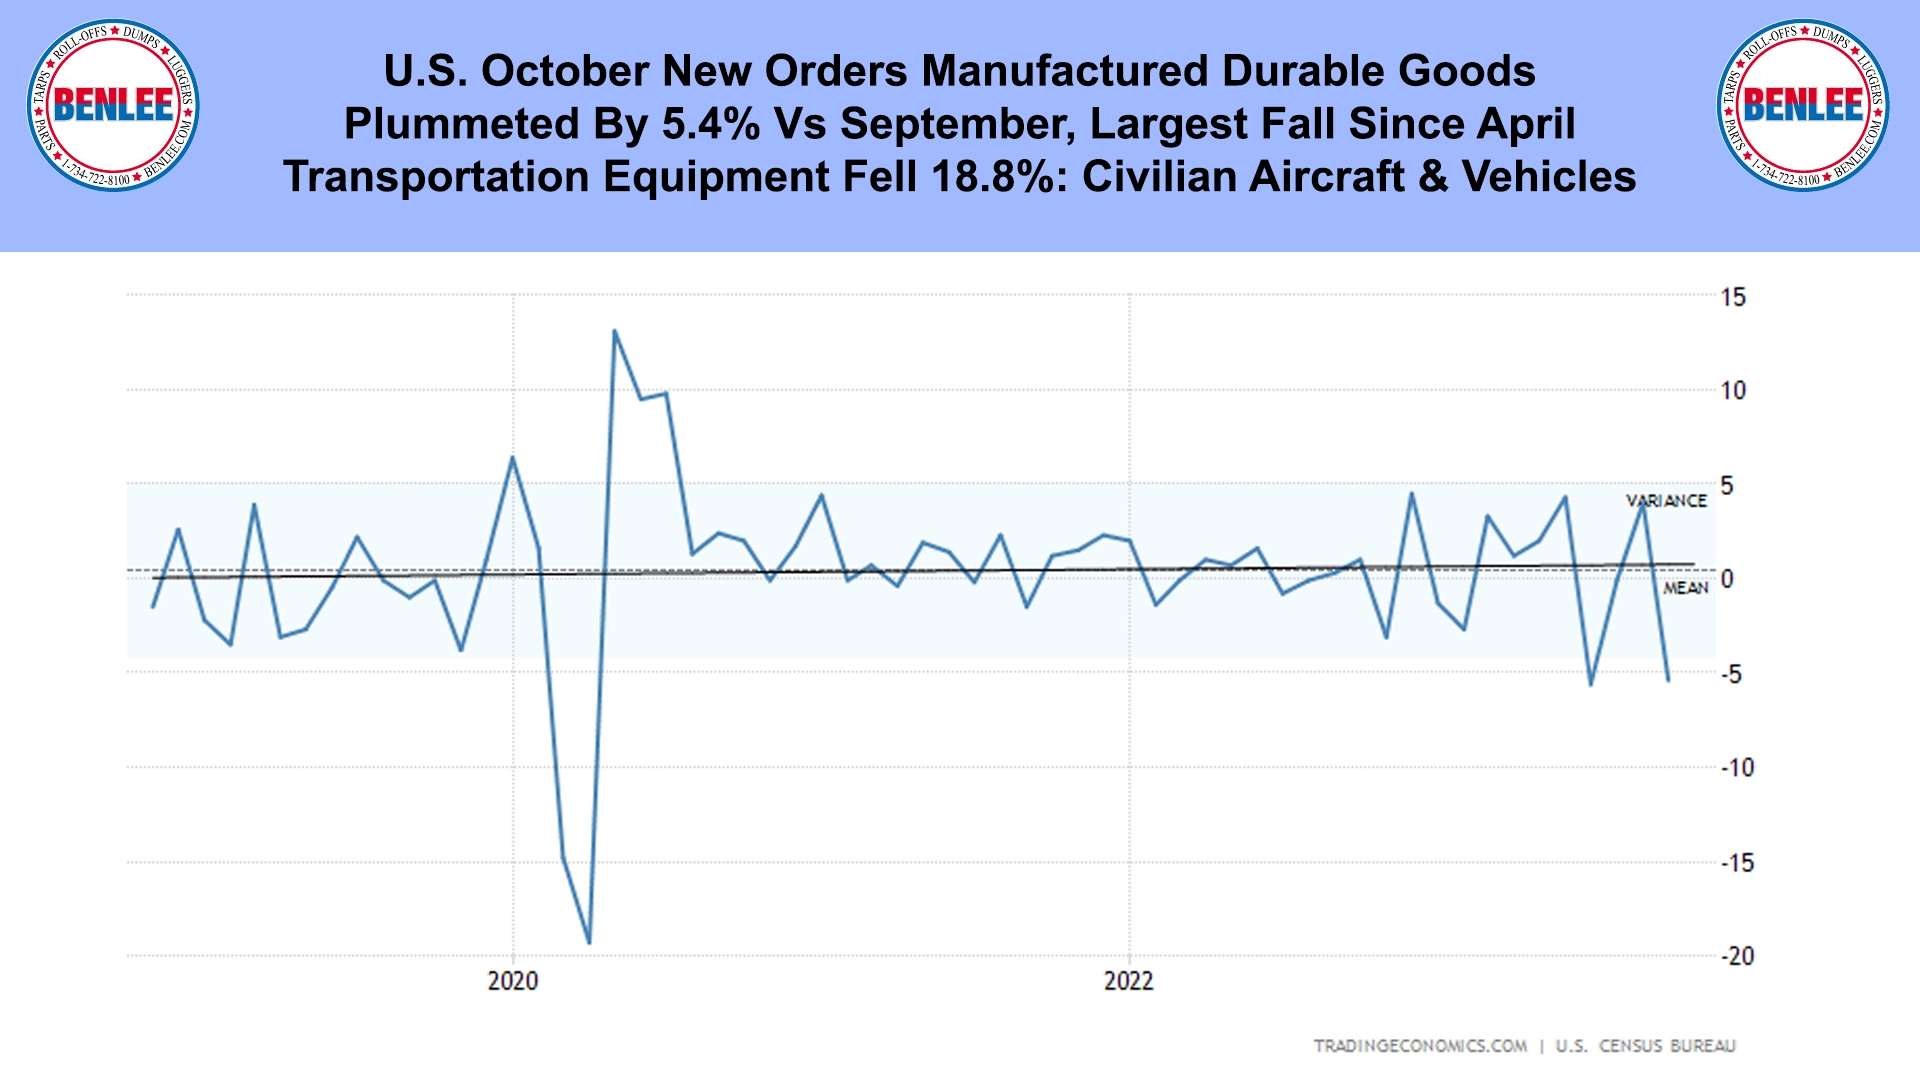 U.S. October New Orders Manufactured Durable Goods